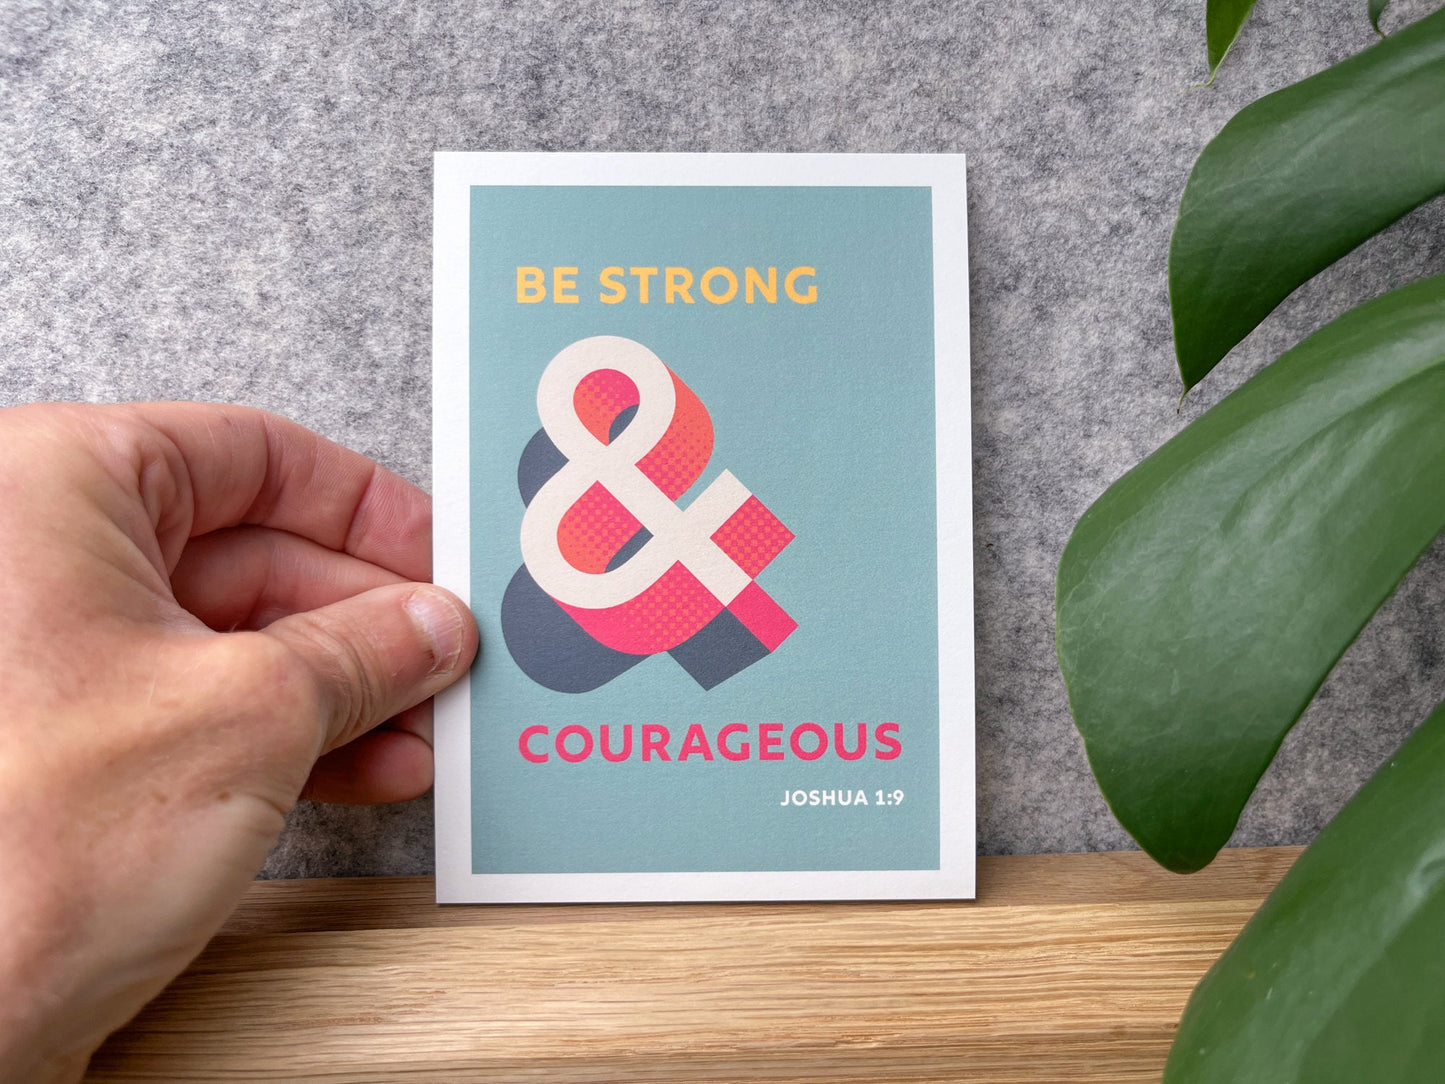 Set of Christian Postcards. Be strong and courageous. Joshua 1 verse 9